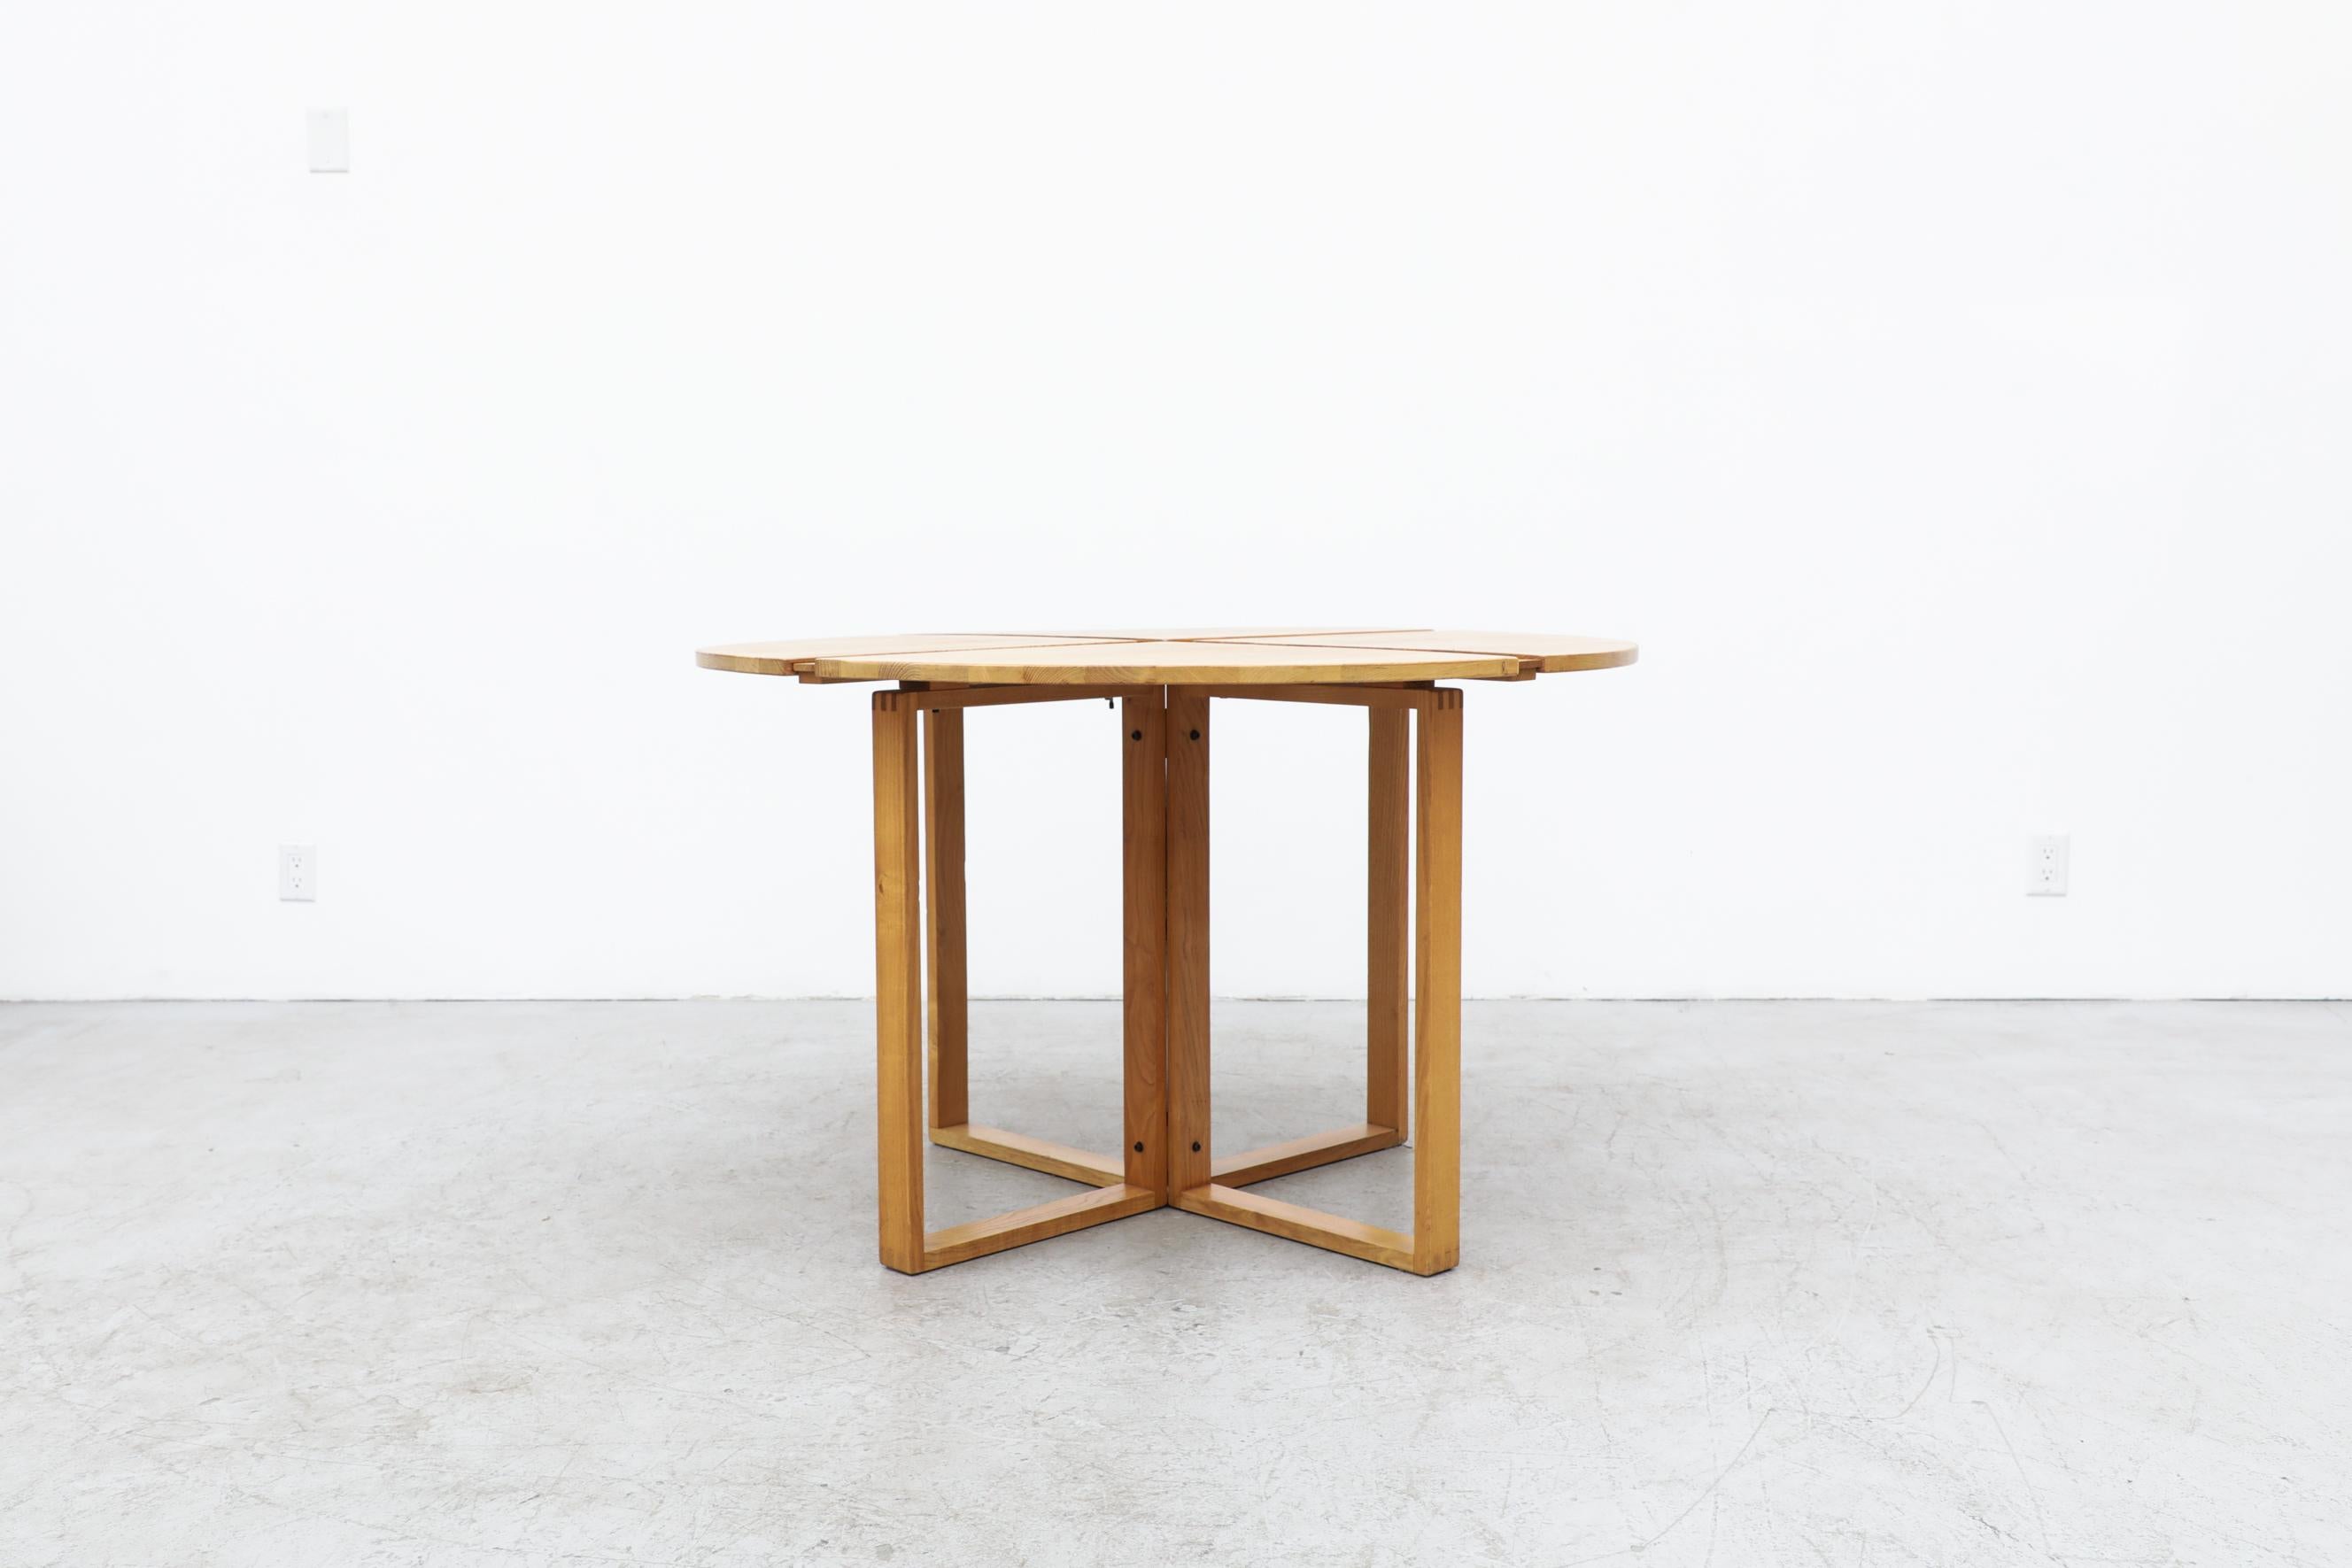 Ate Van Apeldoorn attributed round oak dining or center table with more intricate composition on the top than is customary for Ate. The base has box joint frame, In original condition with some wear consistent with its age and use. There's a